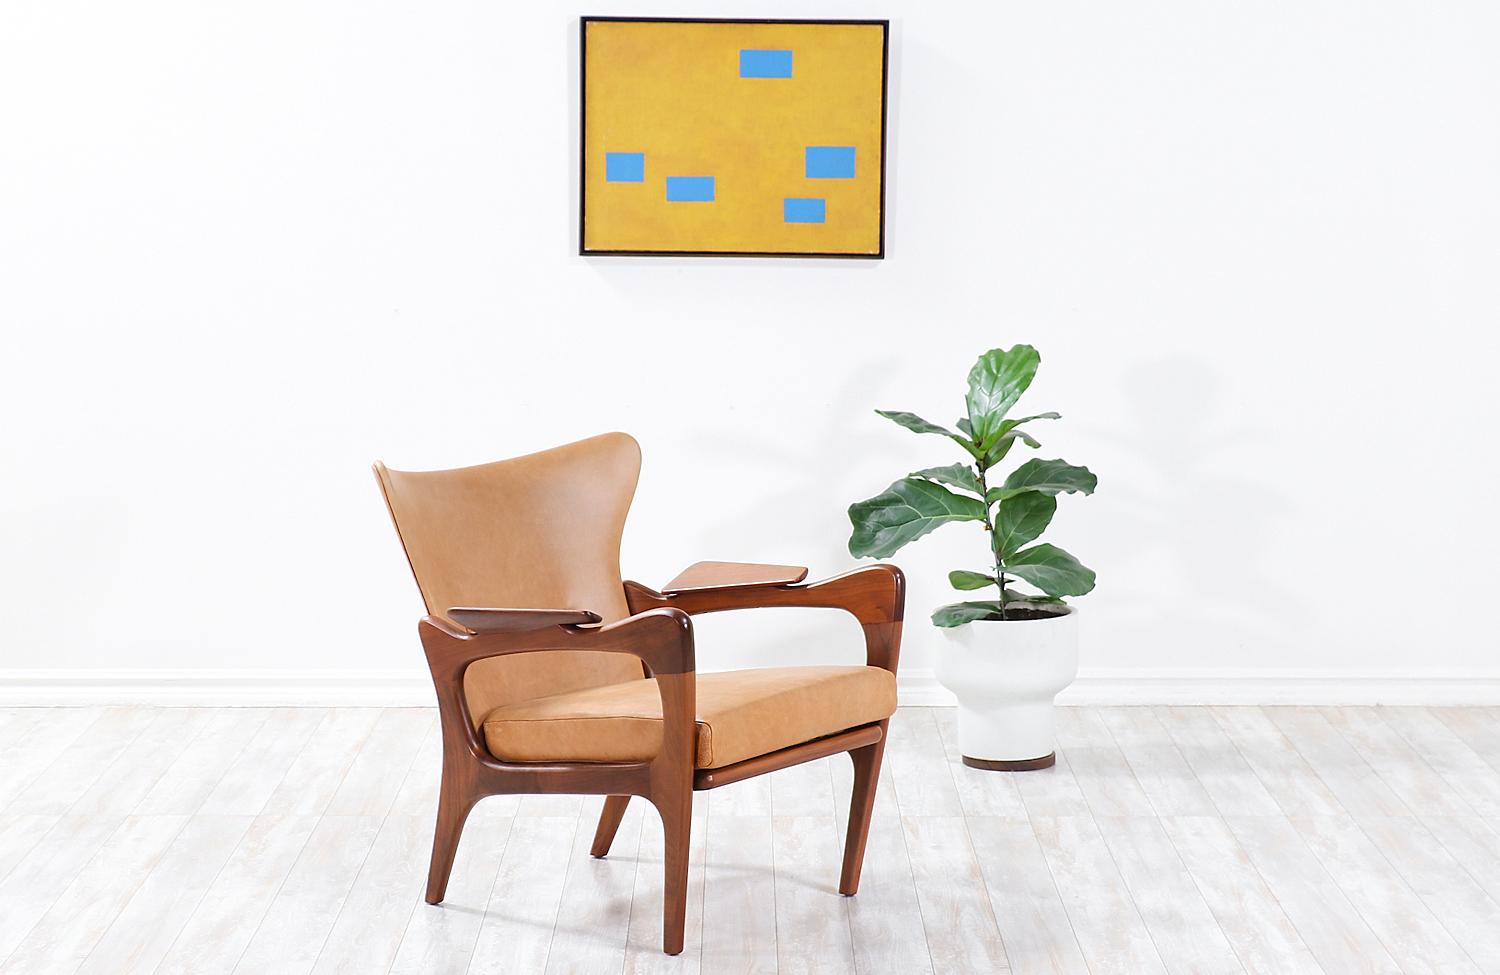 An impressive chair designed by architect Adrian Pearsall in collaboration with the manufacturing company, Craft Associates, Inc. who operated in Wilkes-Barre, Pennsylvania in the 1960s. This rare wingback chair, also known as the Model 2291-C